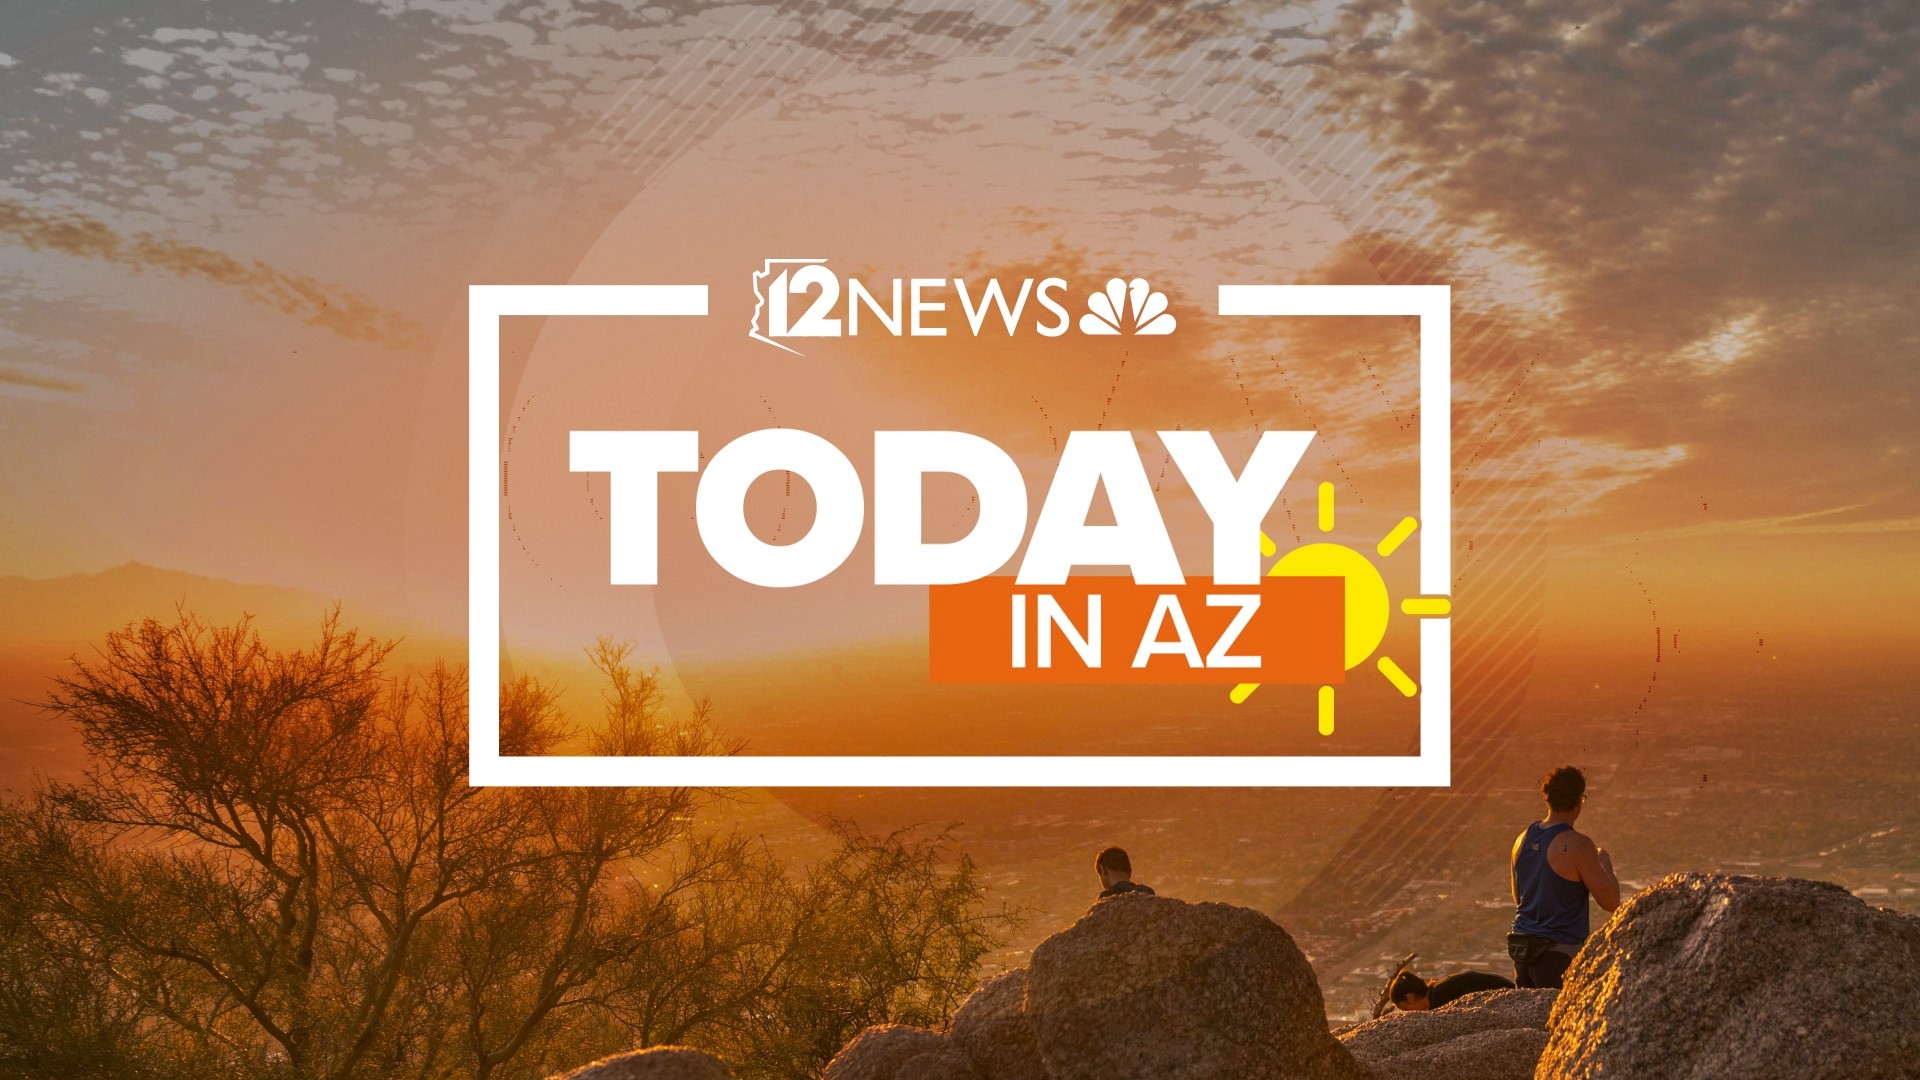 Start your early morning with AZ's most energetic news team. Get your news, sports and entertainment here.